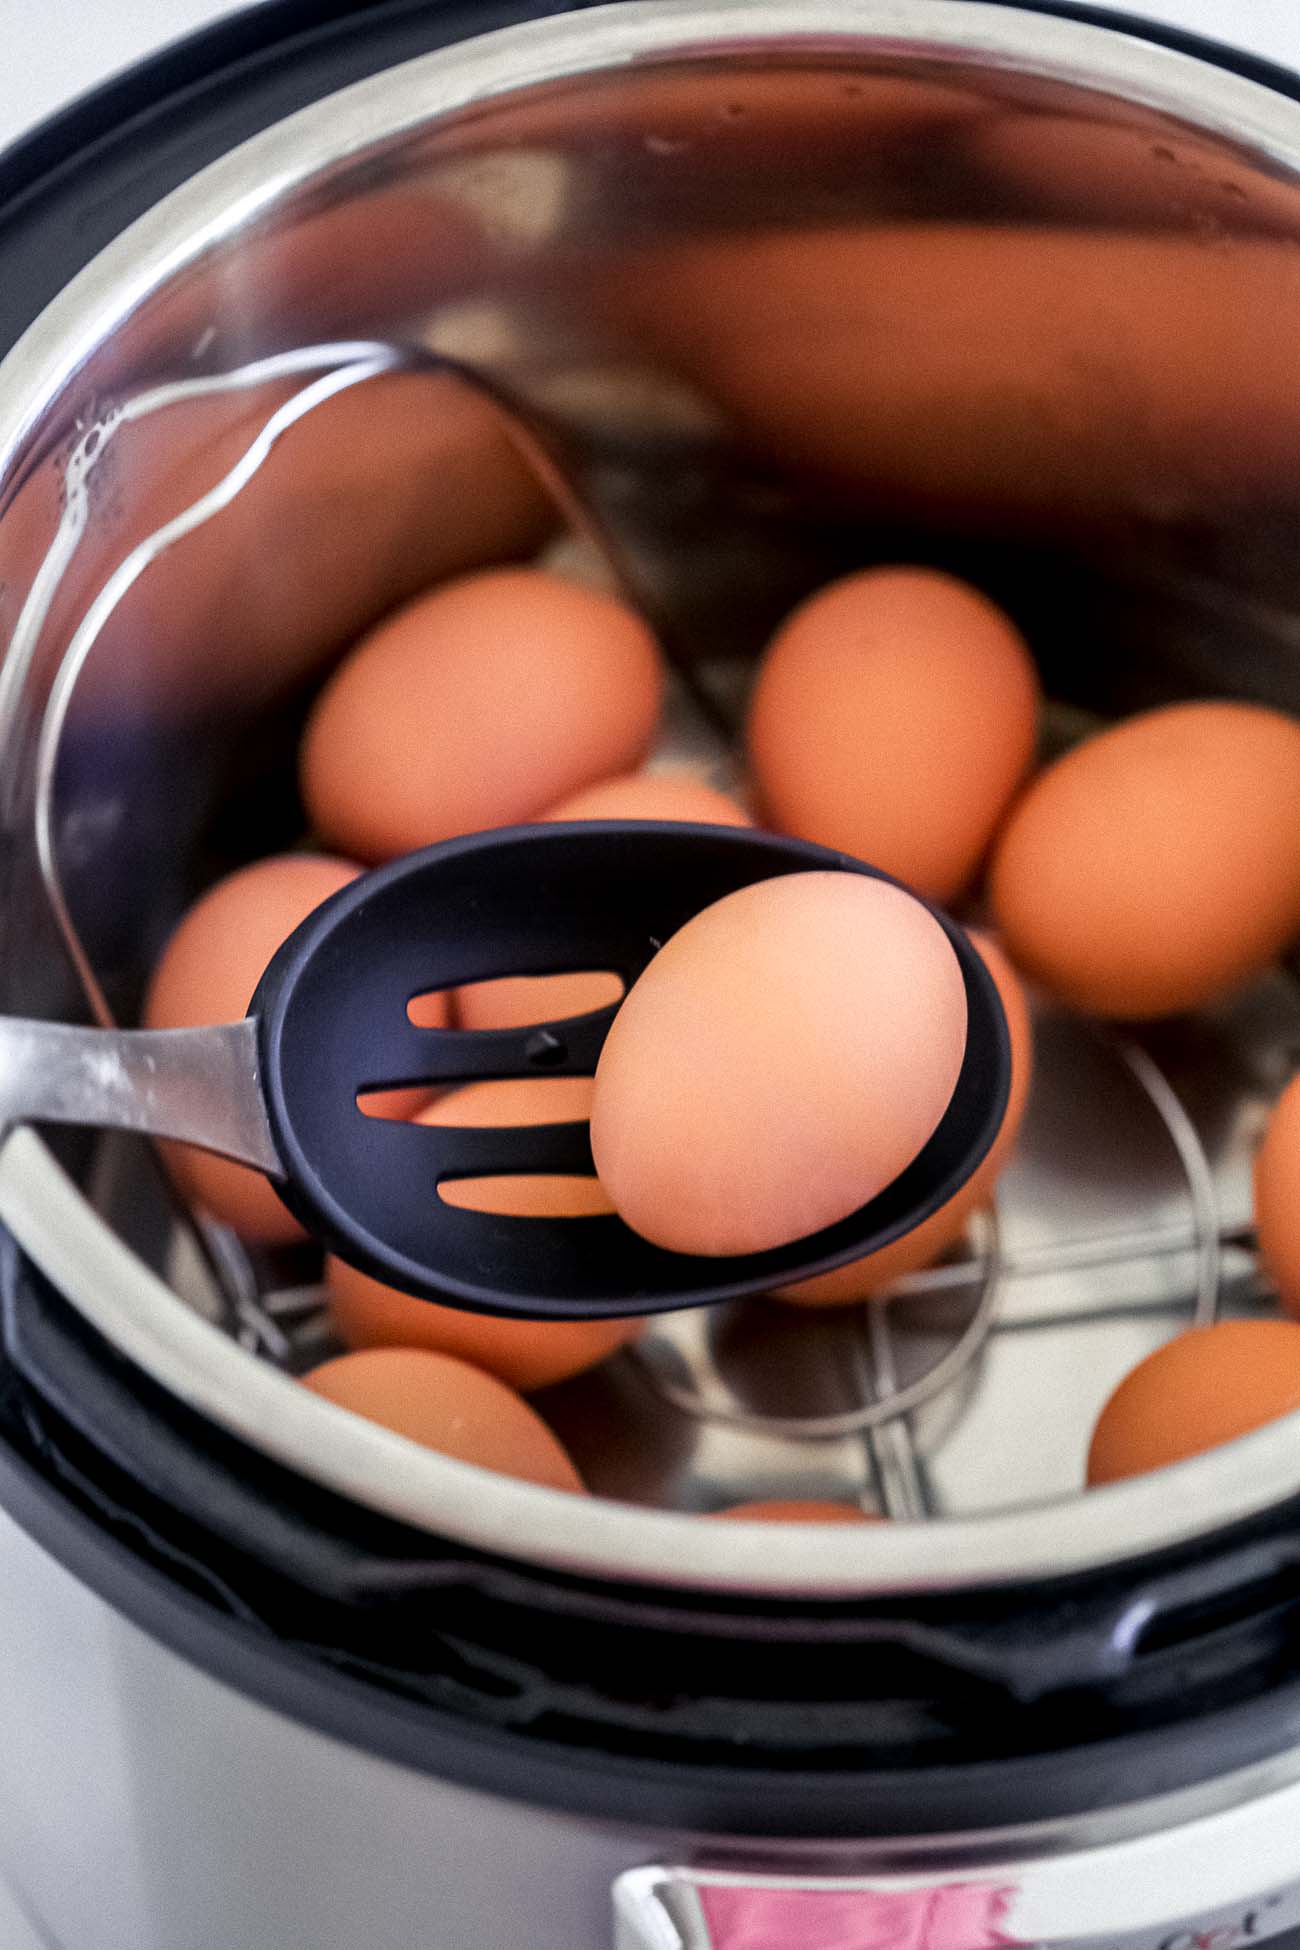 Using a slotted spoon to remove hard boiled eggs in the Instant Pot.